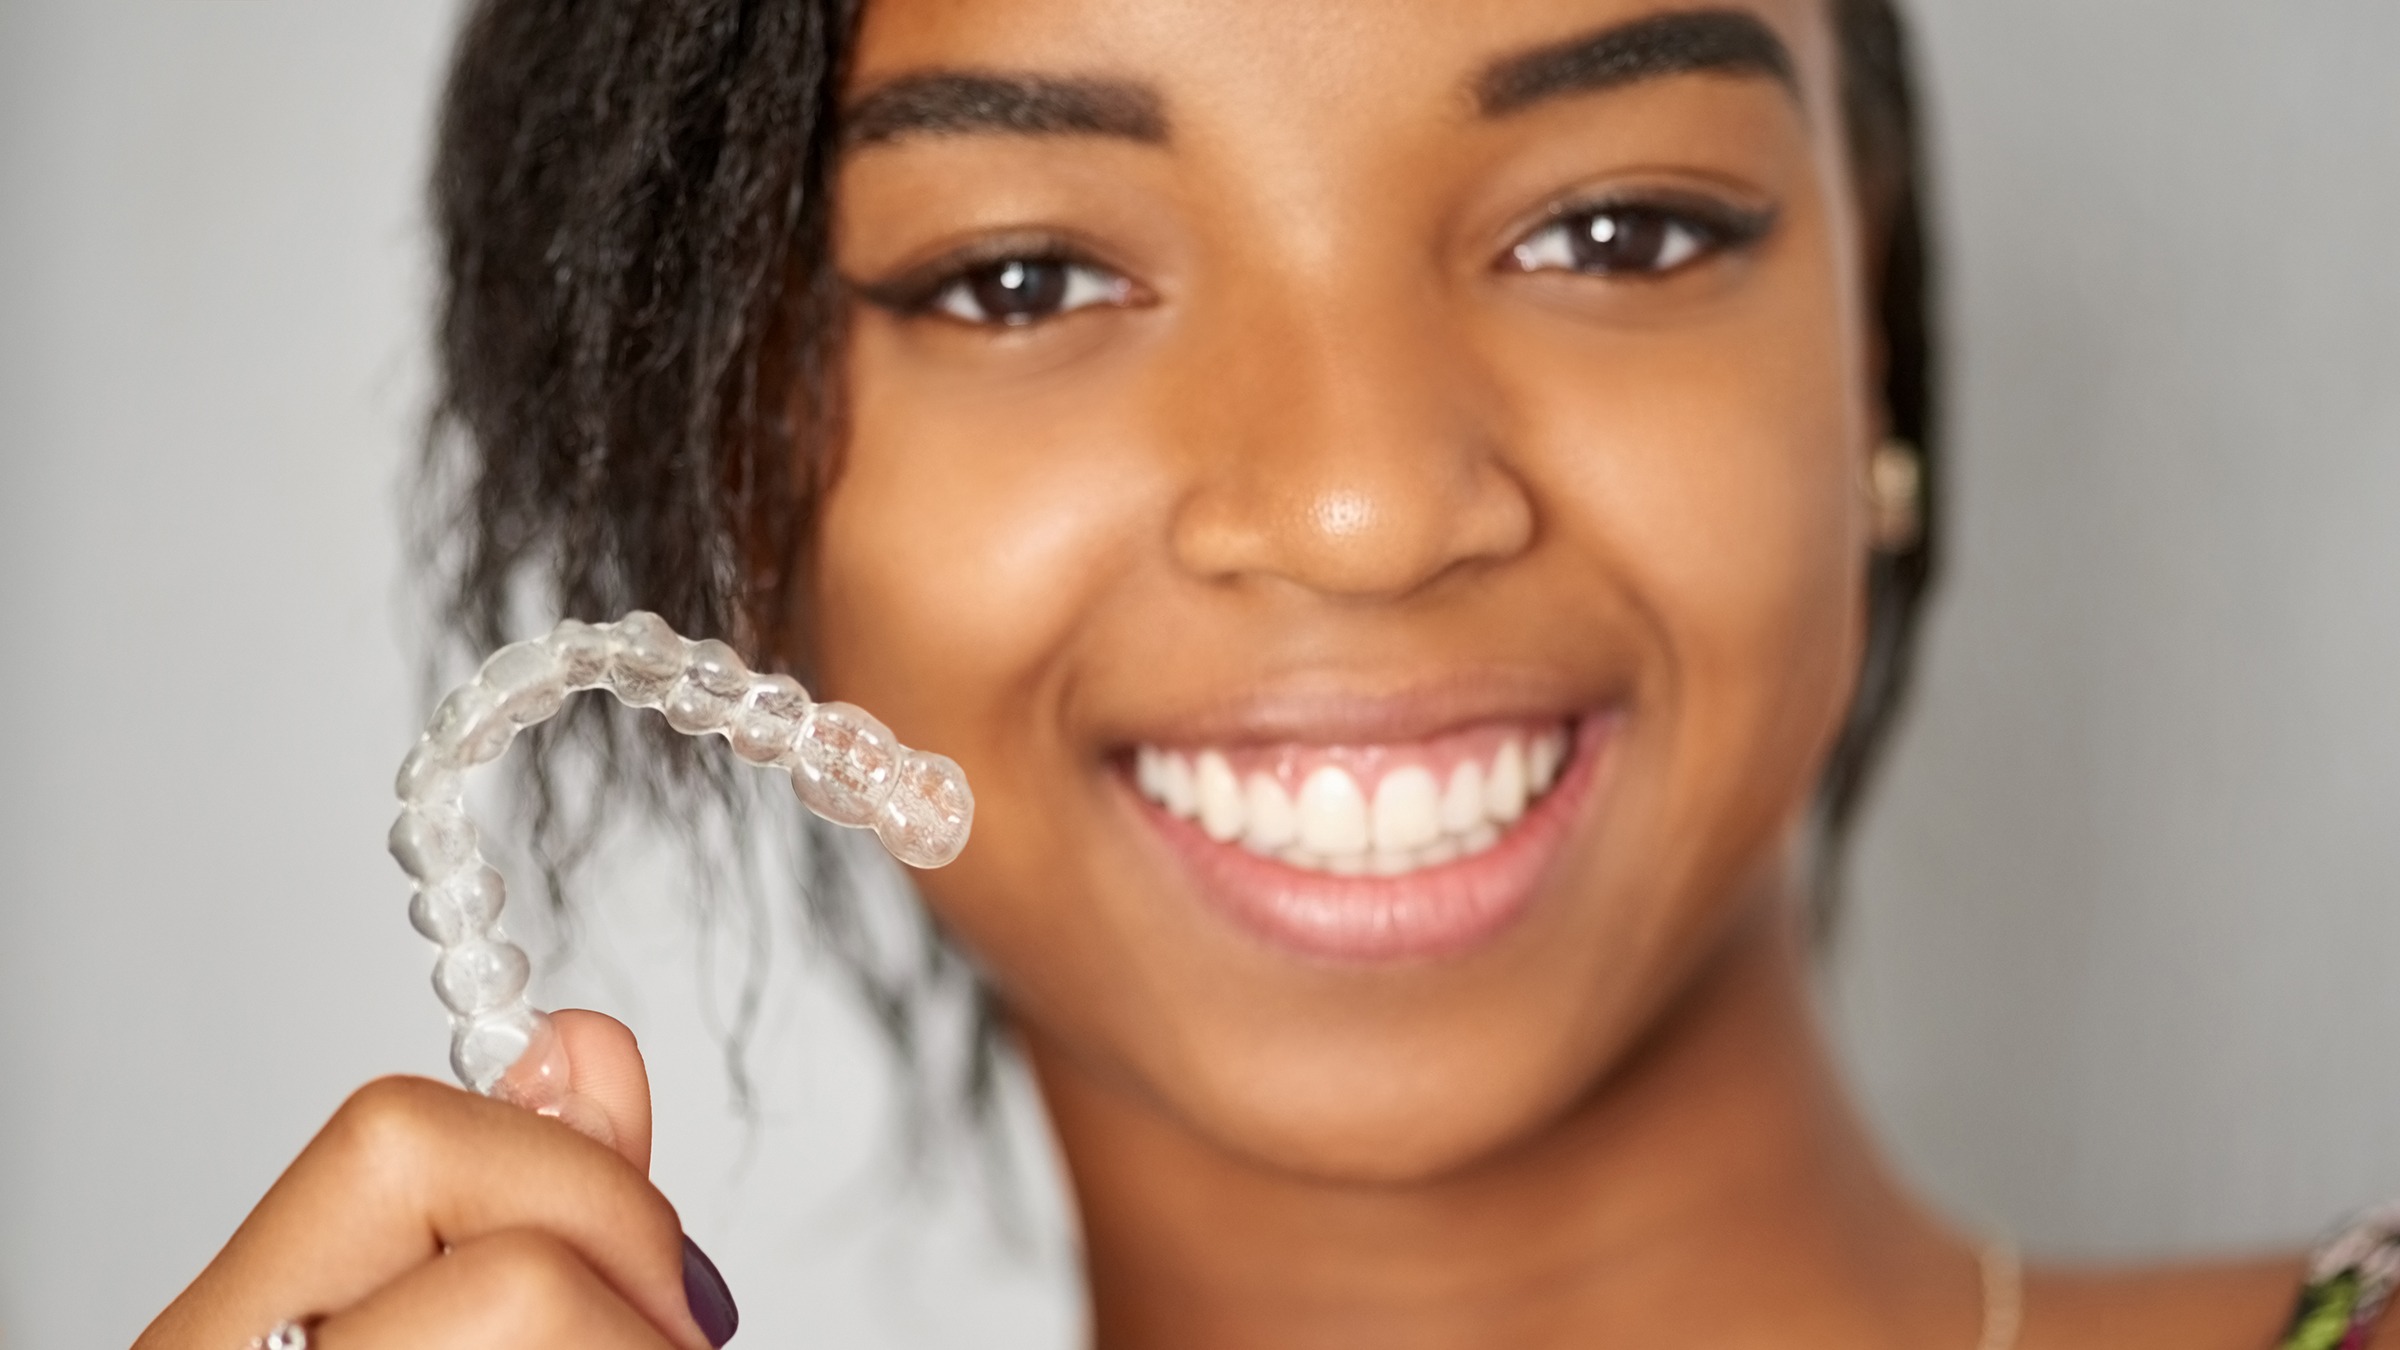 How Much Does Invisalign Cost Without Insurance? GoodRx